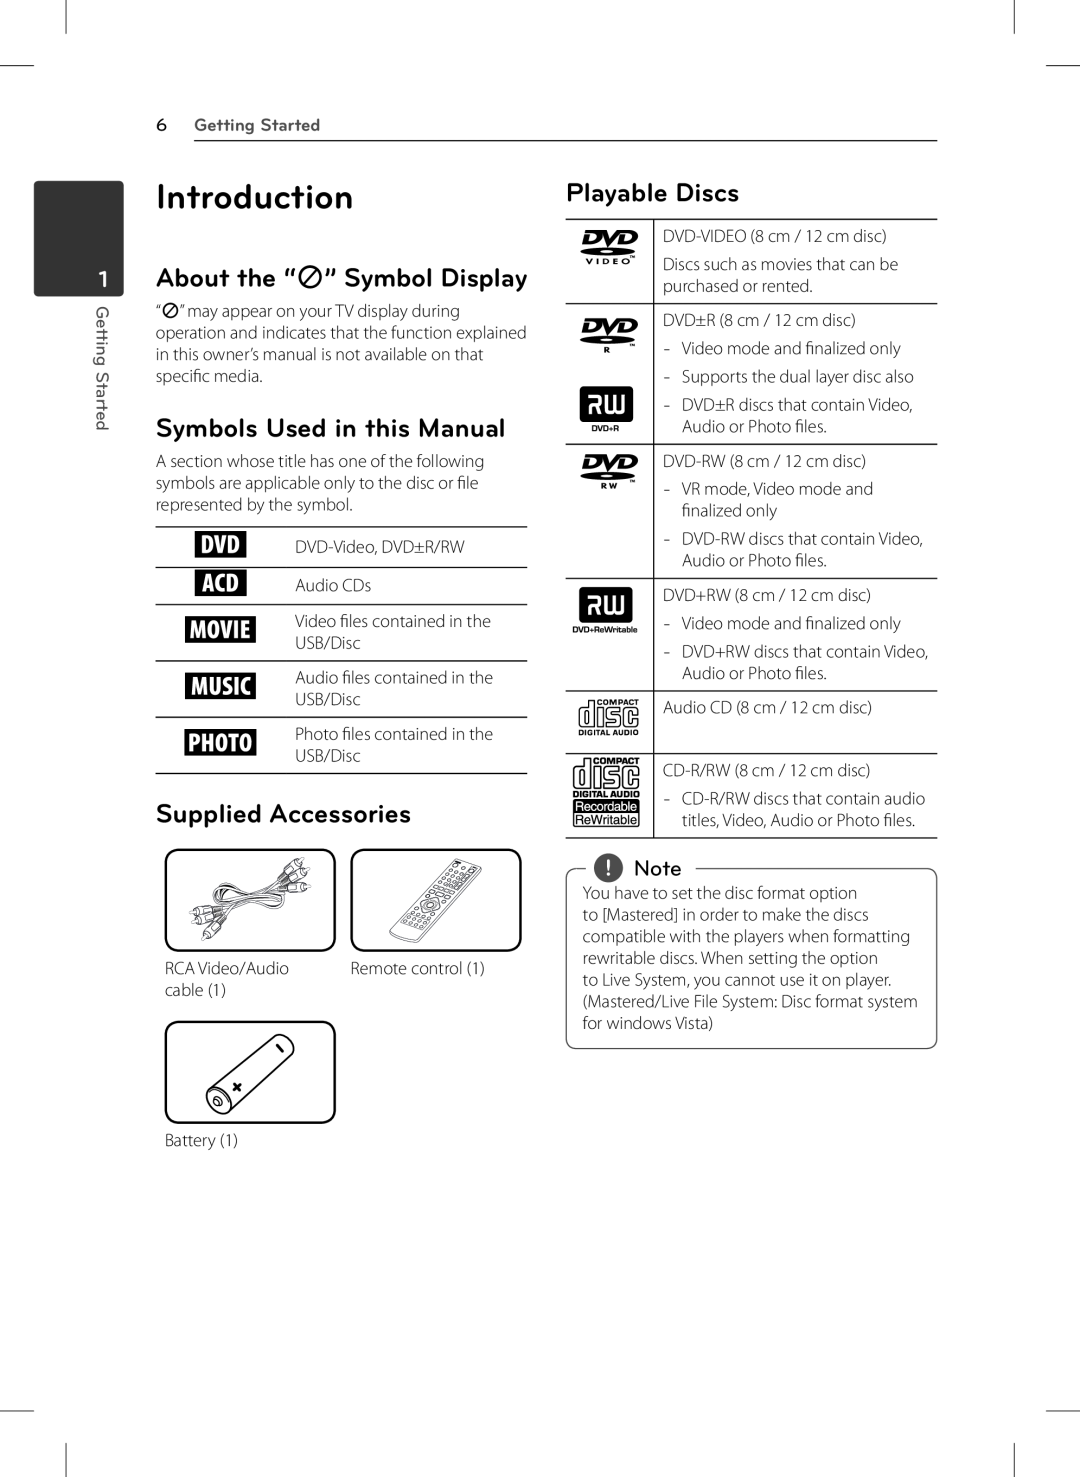 LG Electronics DVX692H Introduction, About the “7” Symbol Display, Symbols Used in this Manual, Supplied Accessories 